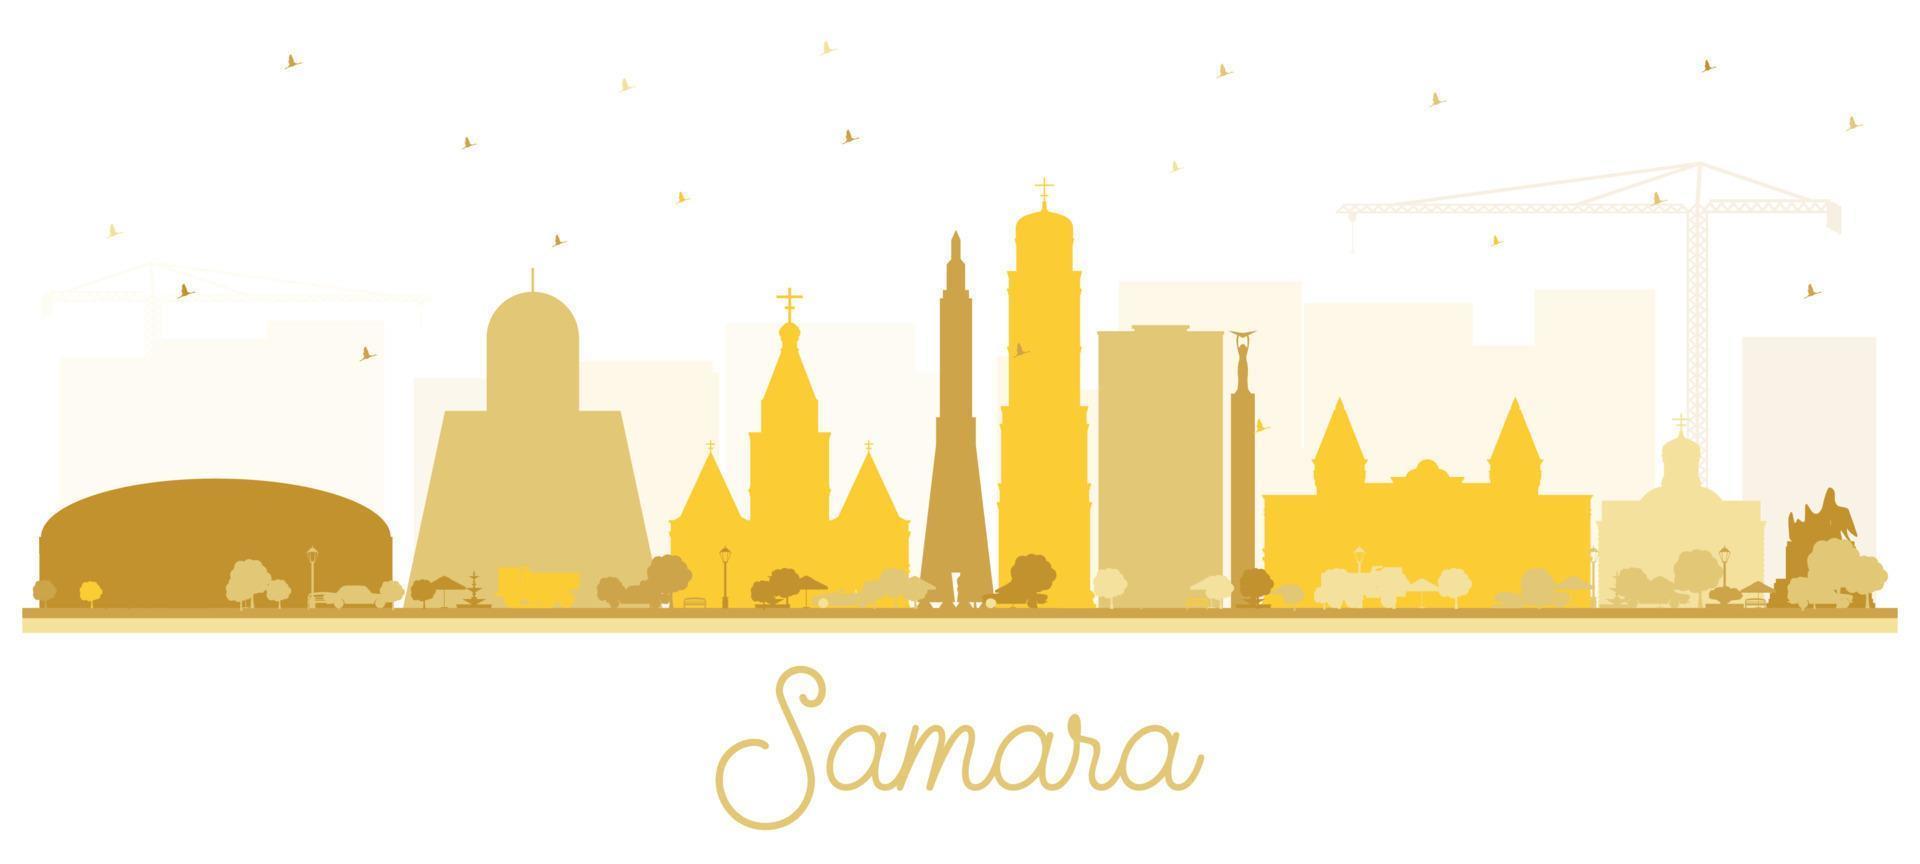 Samara Russia City Skyline Silhouette with Golden Buildings Isolated on White. vector